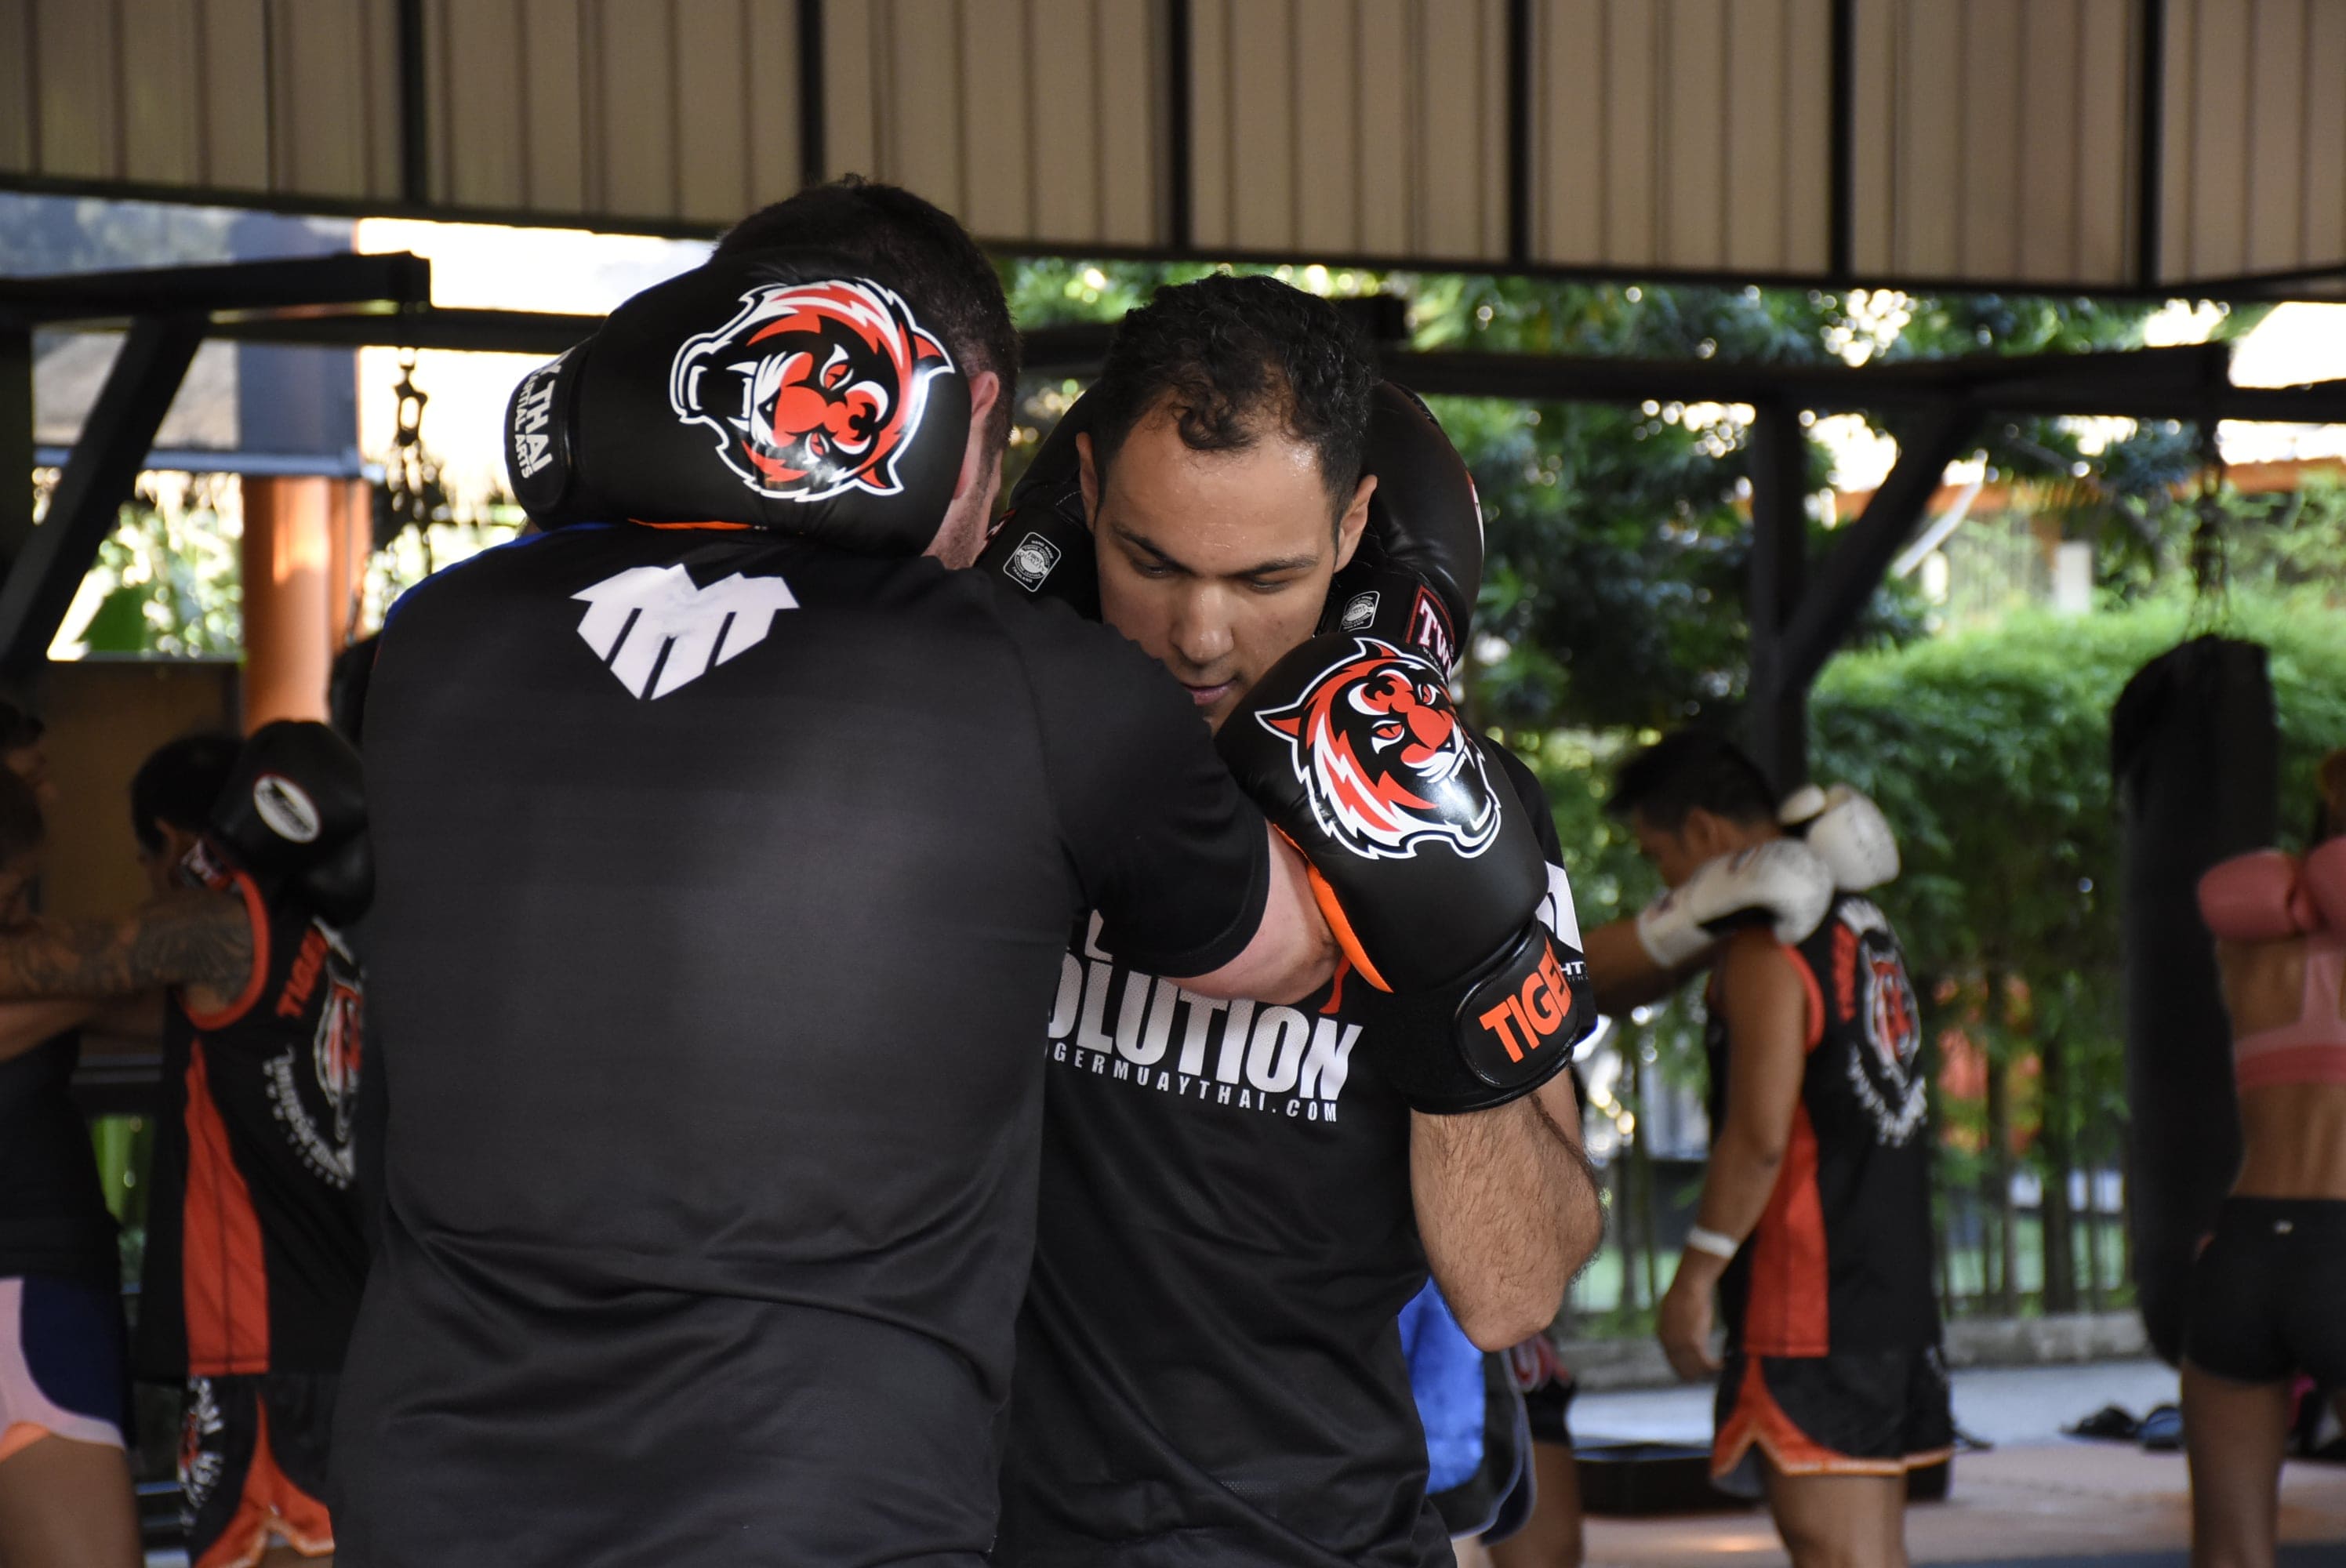 The difference between kickboxing and Muay Thai